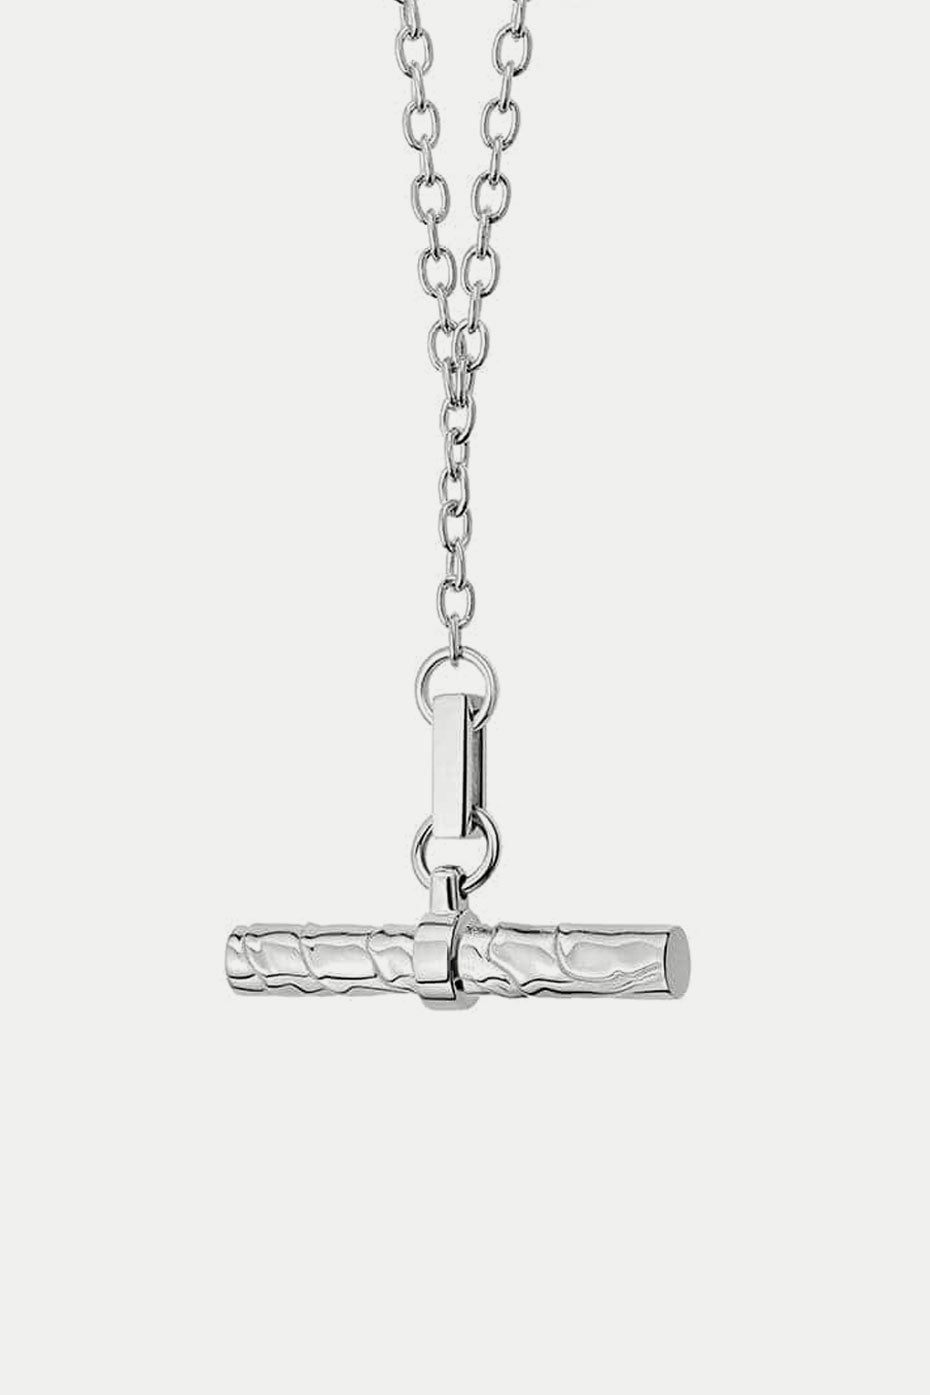 Daisy London Silver Treasures Oyster T-bar Necklace